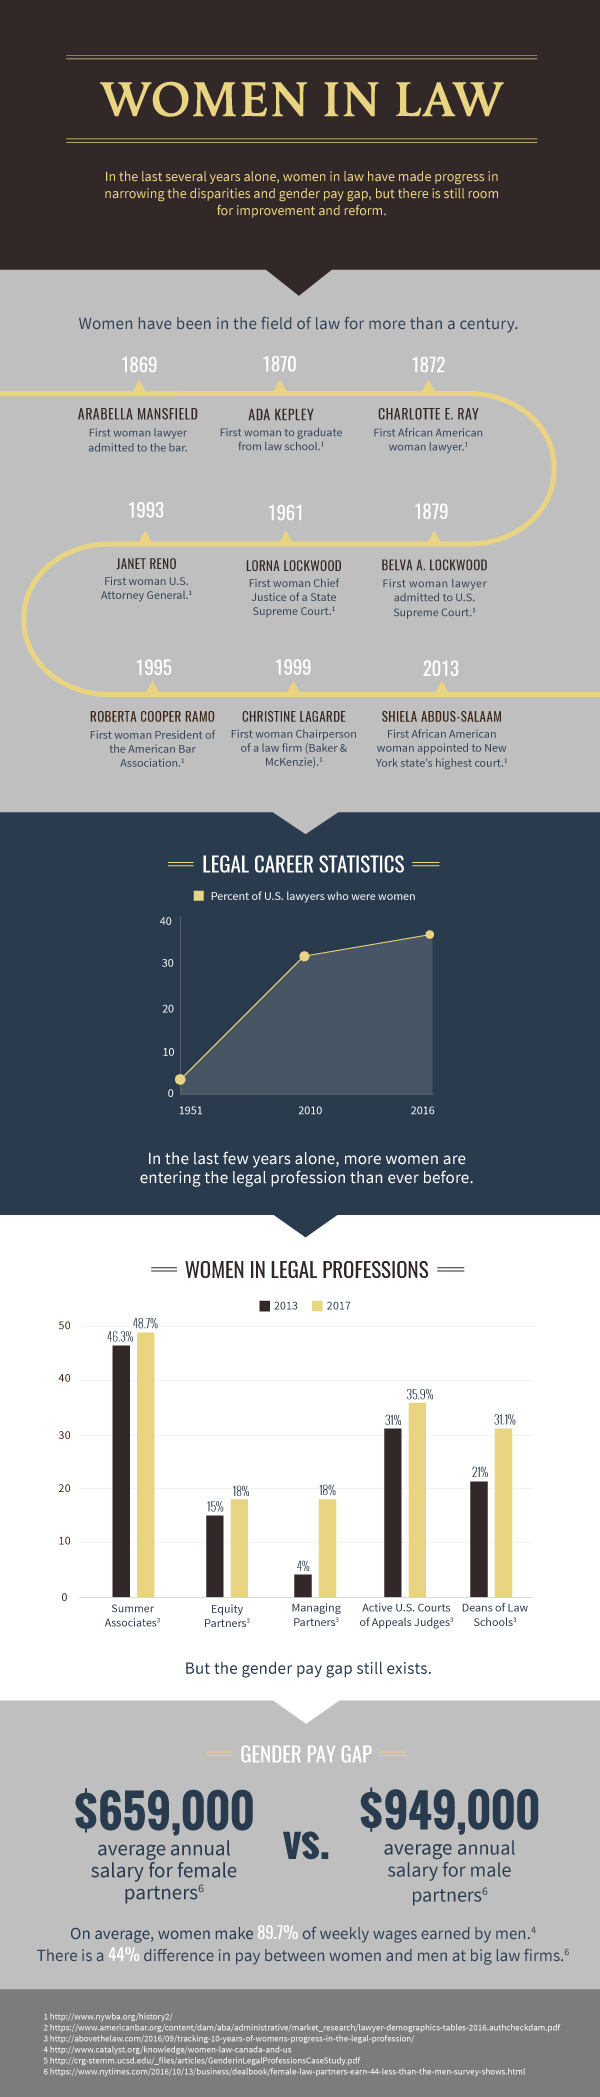 women in law infographic